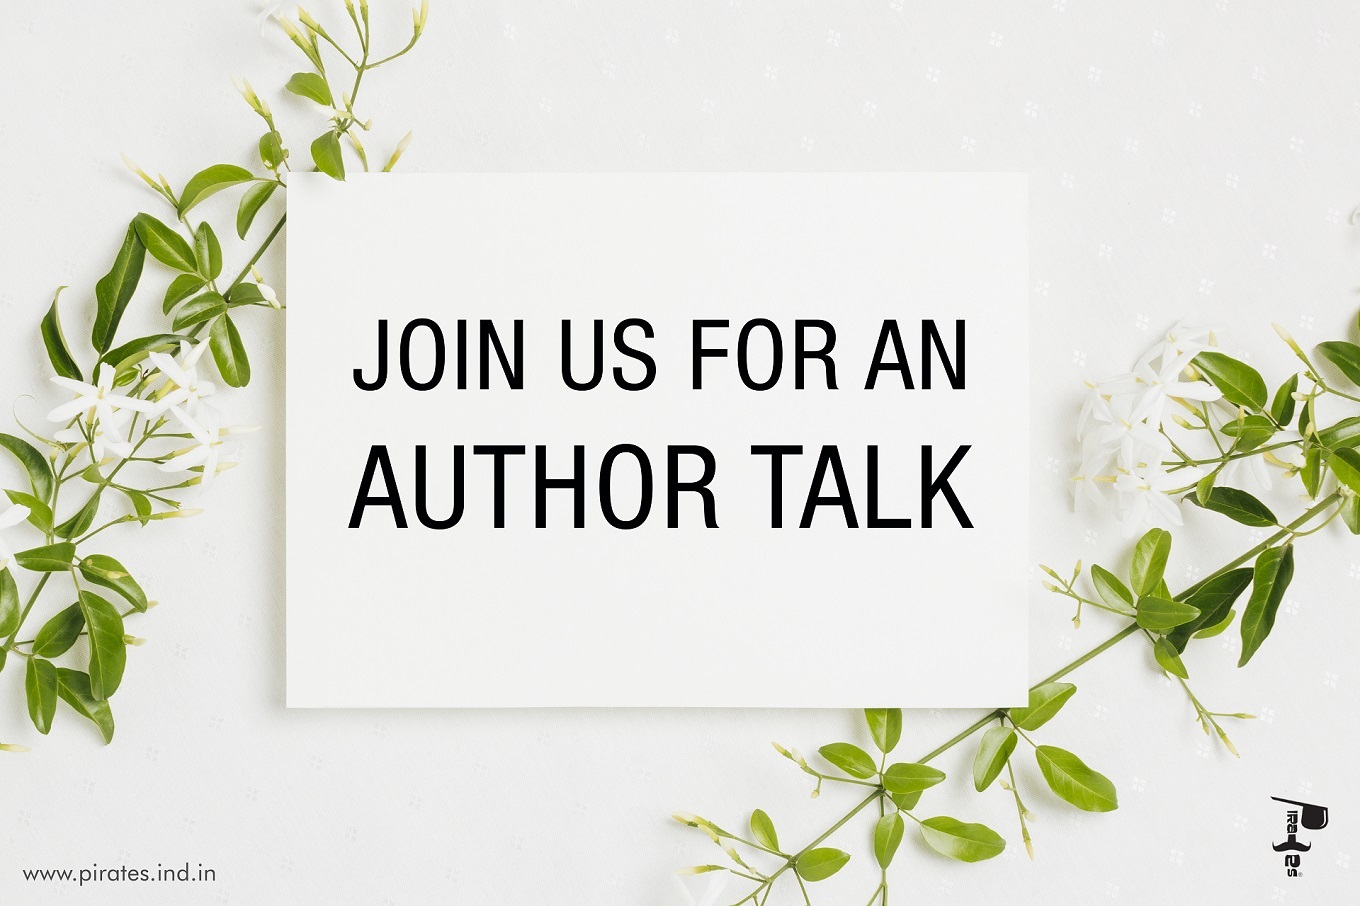 Join us for an Author Talk